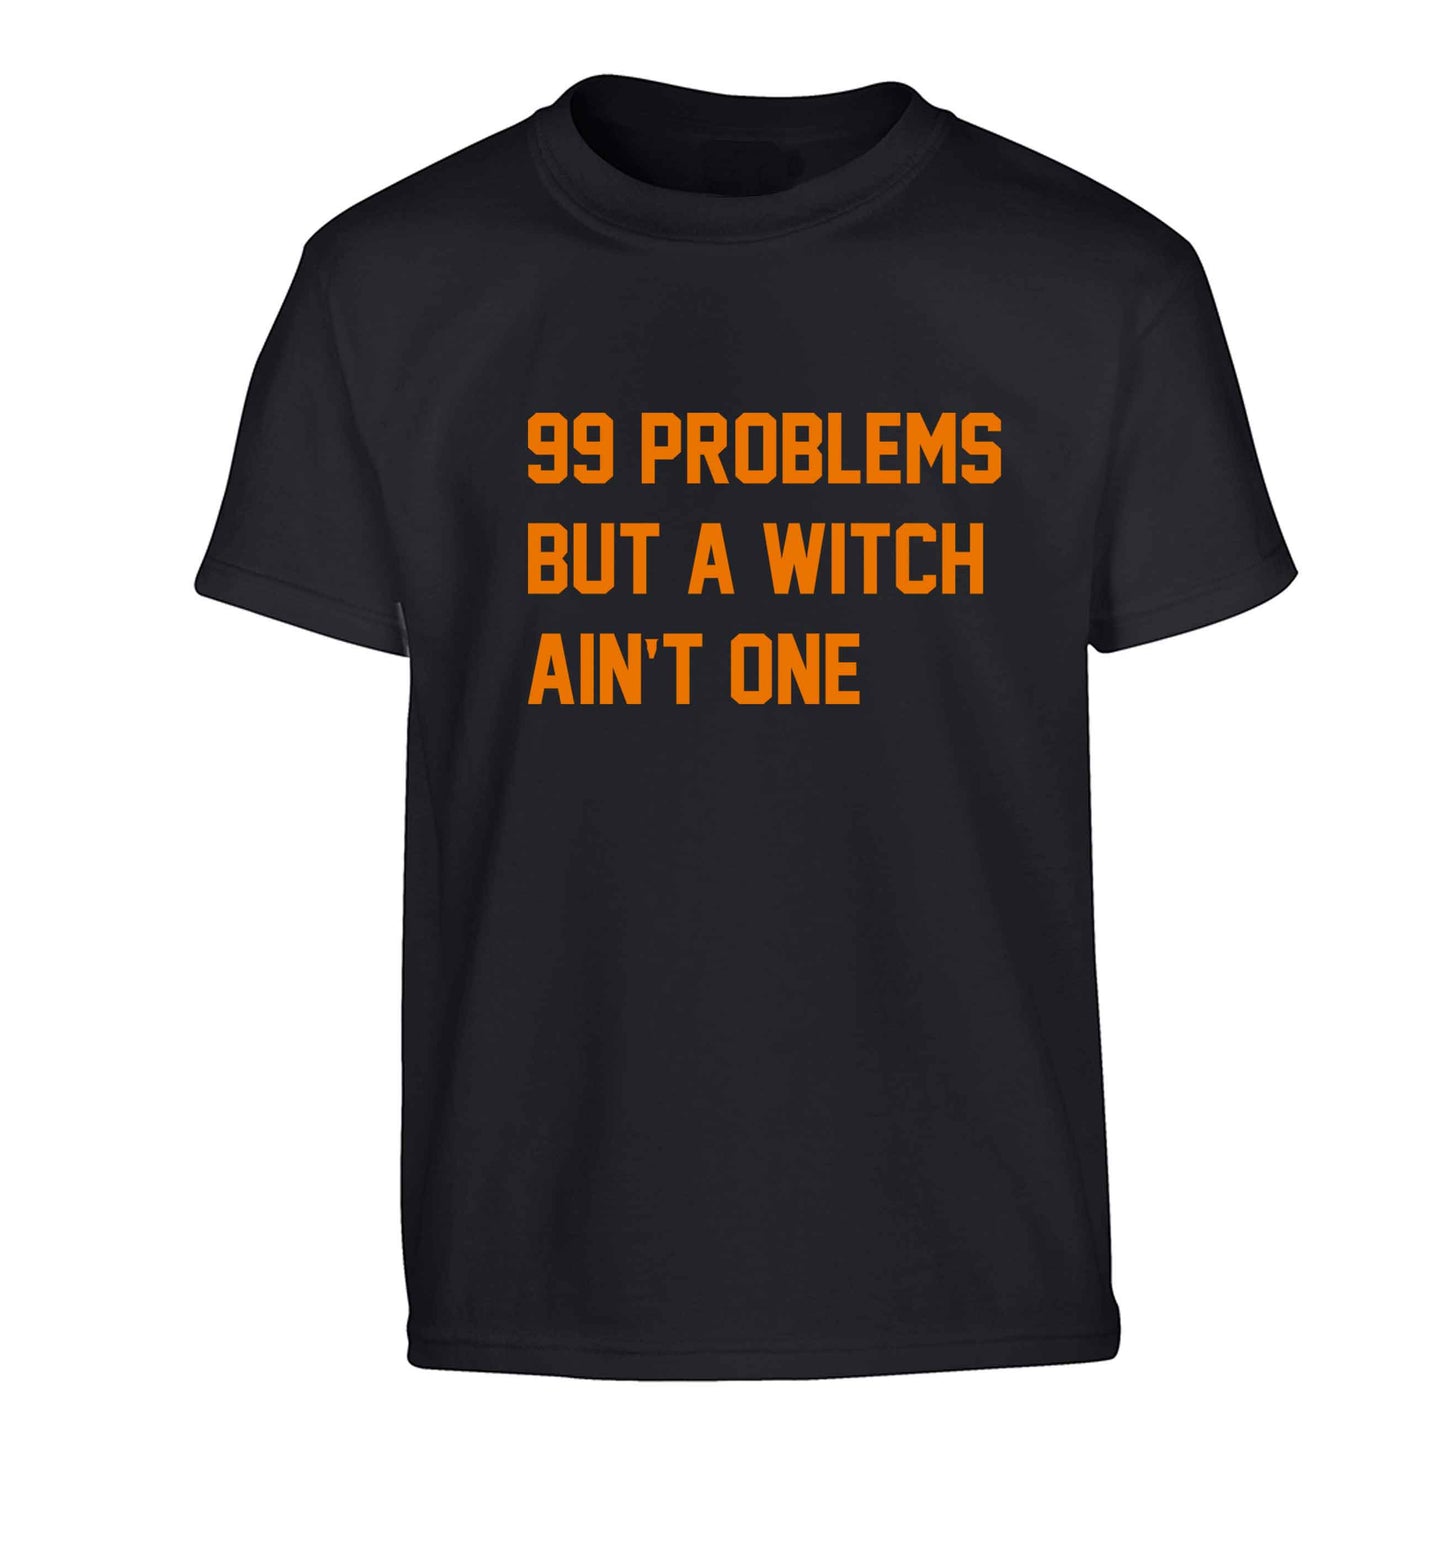 99 Problems but a witch aint one Children's black Tshirt 12-13 Years